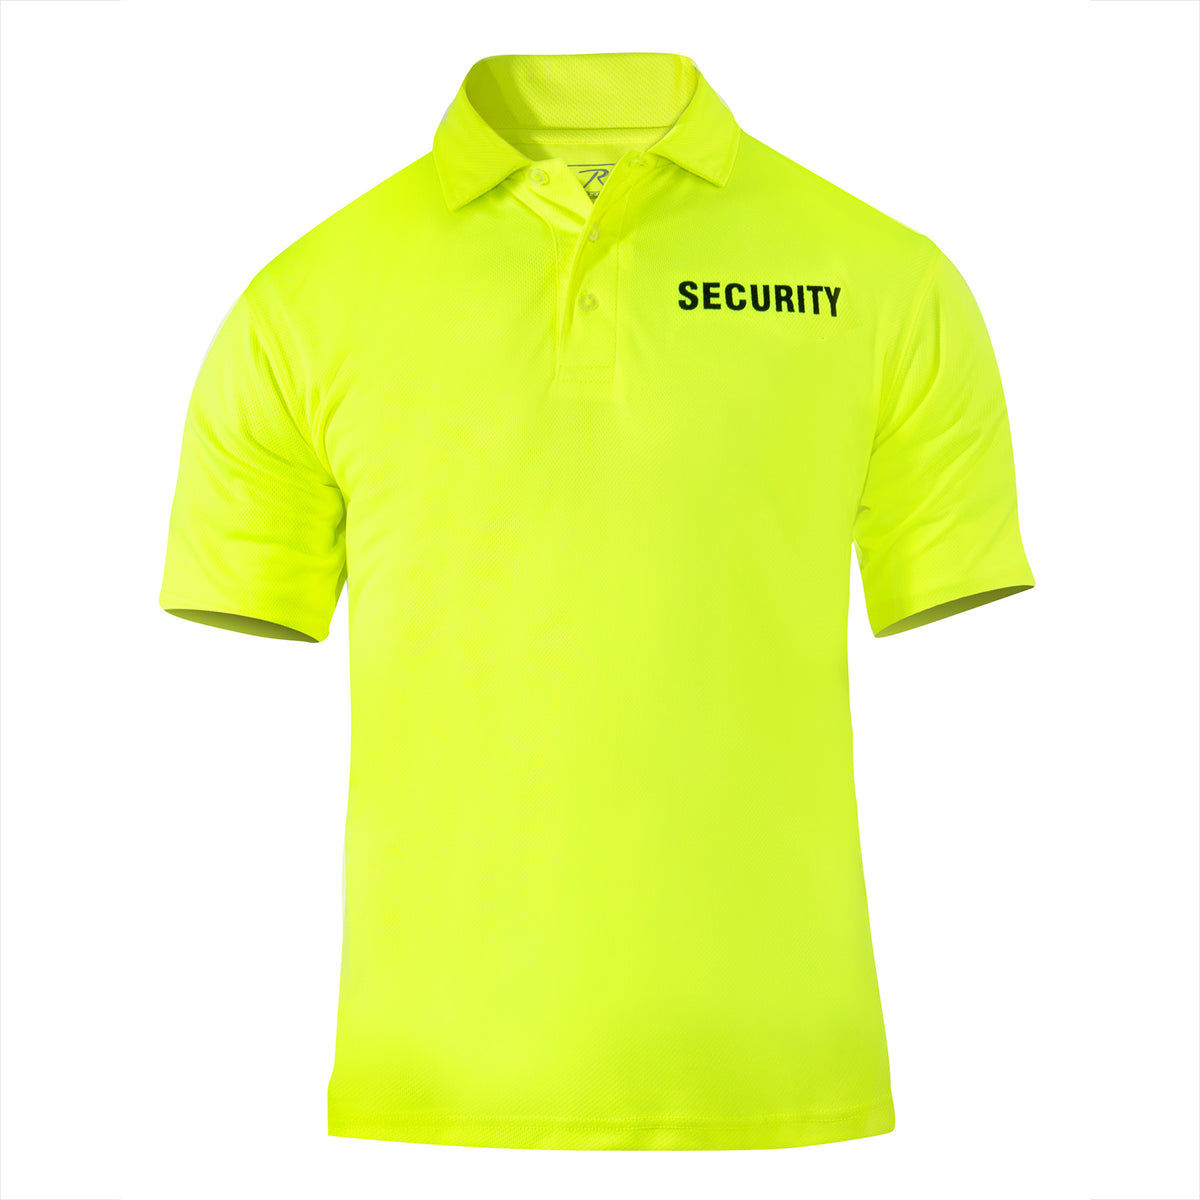 Rothco Moisture Wicking Security Polo safety green